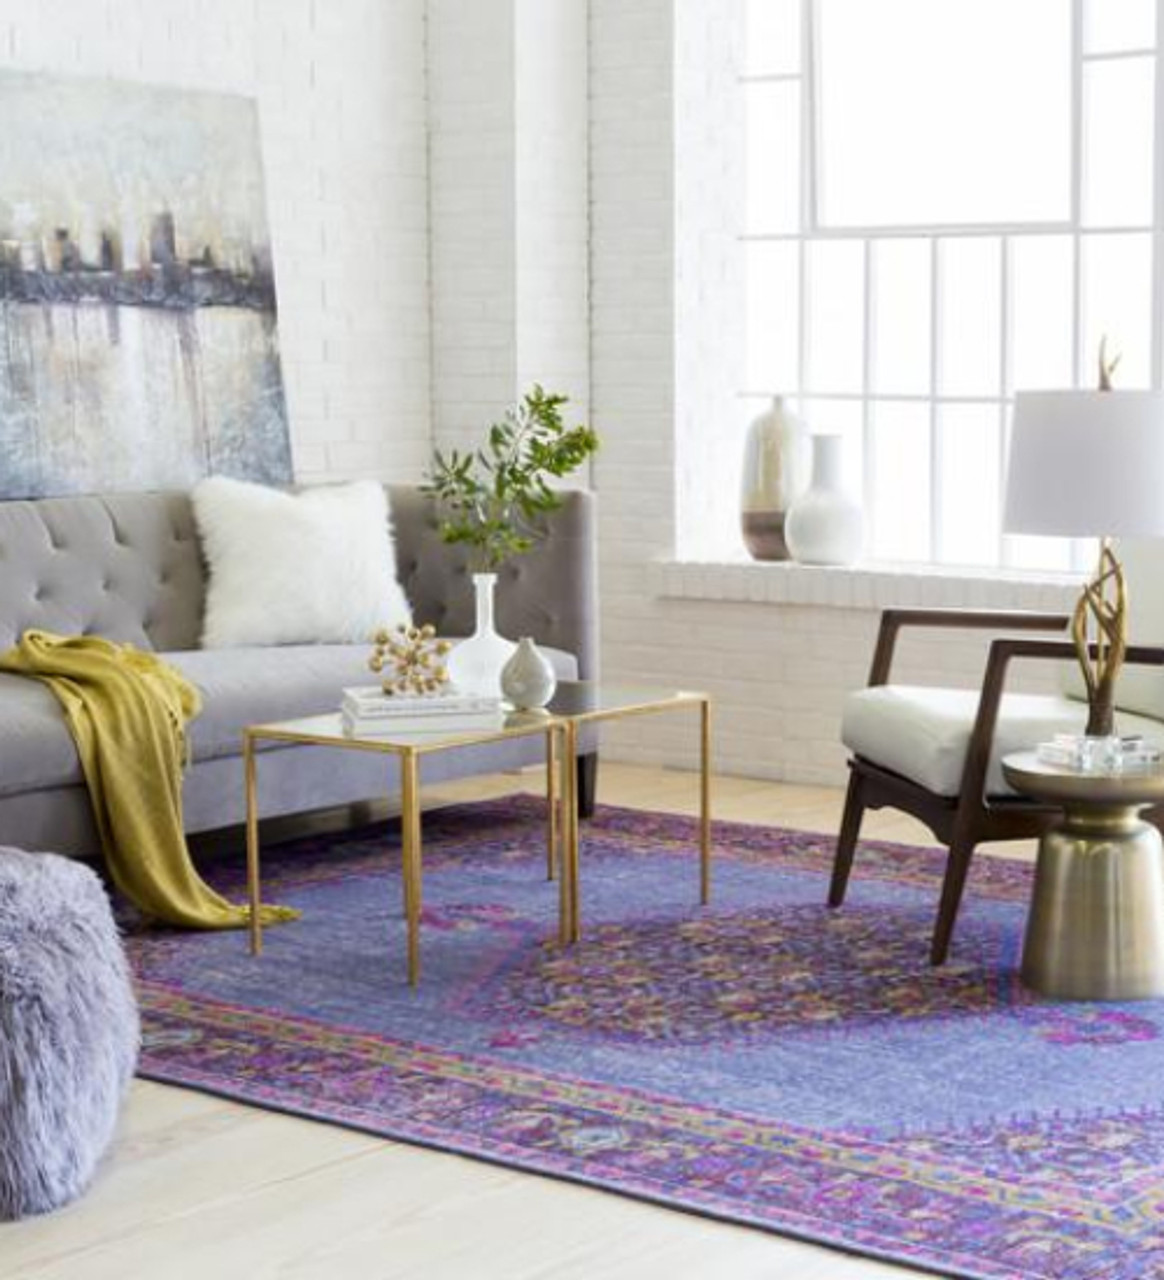 How to Choose the Best Living Room Rugs